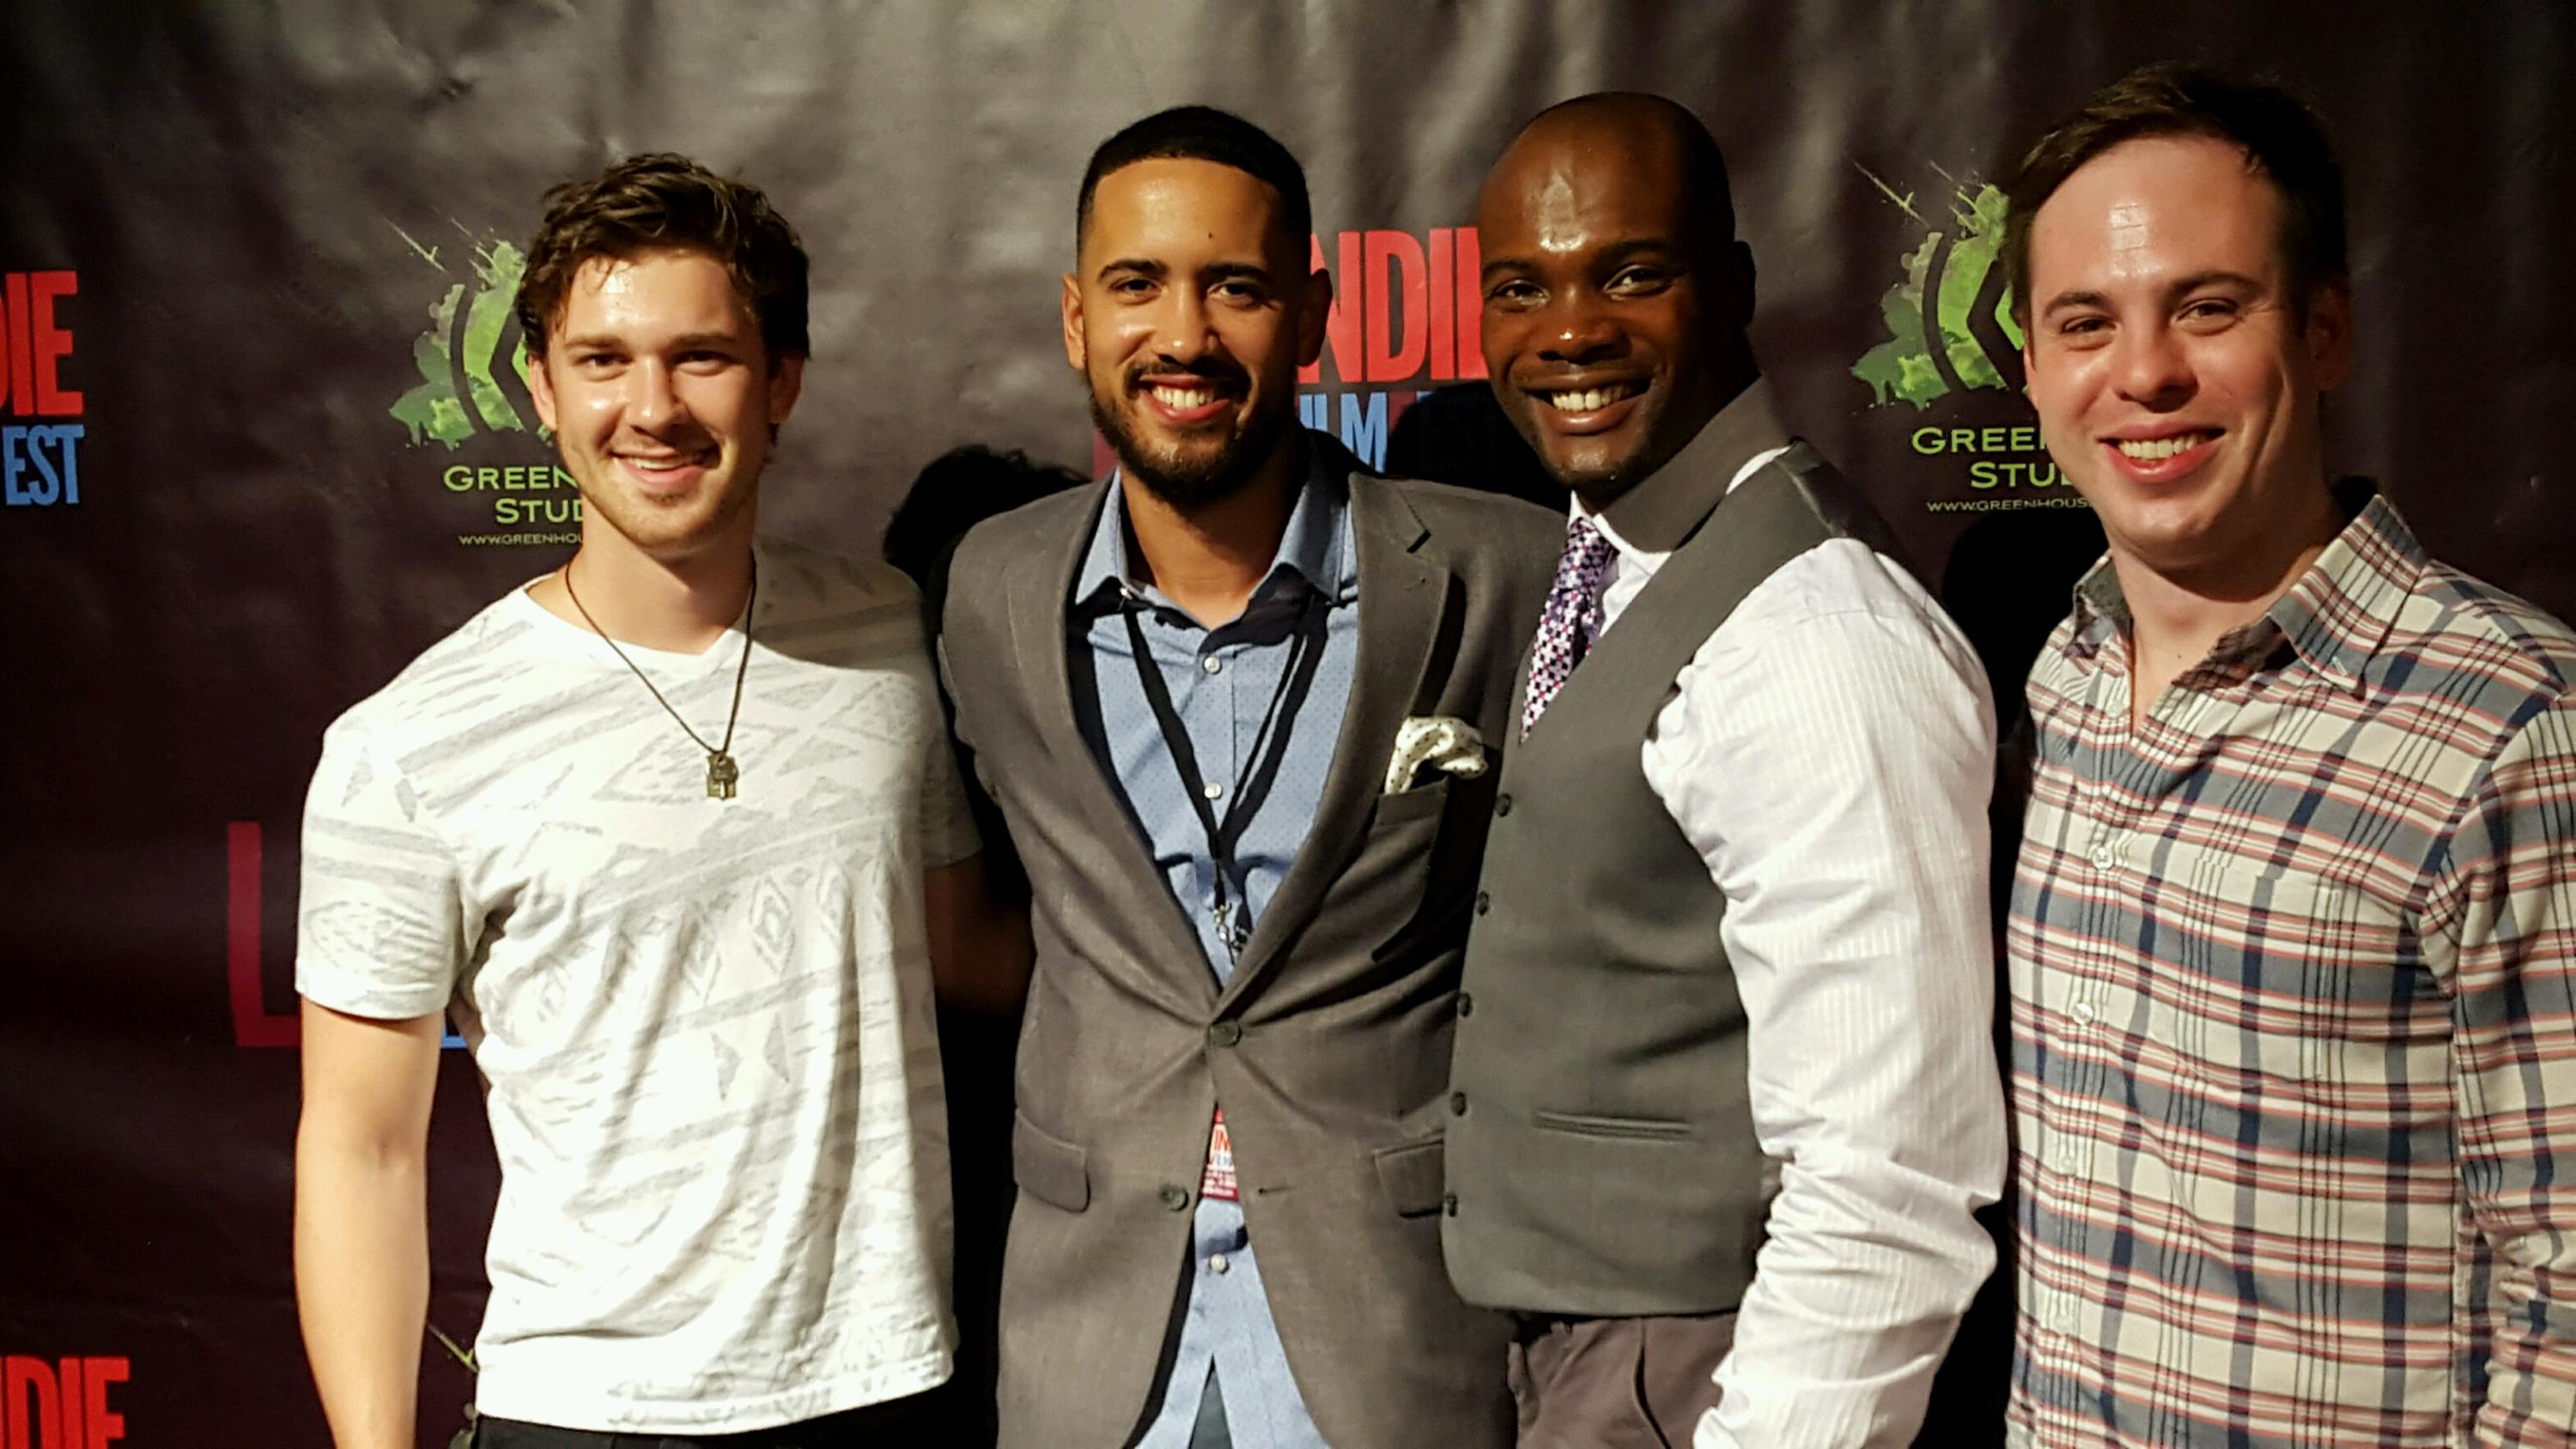 World Premiere screening of To Police (2015) at the 7th Annual LA Indie Film Festival